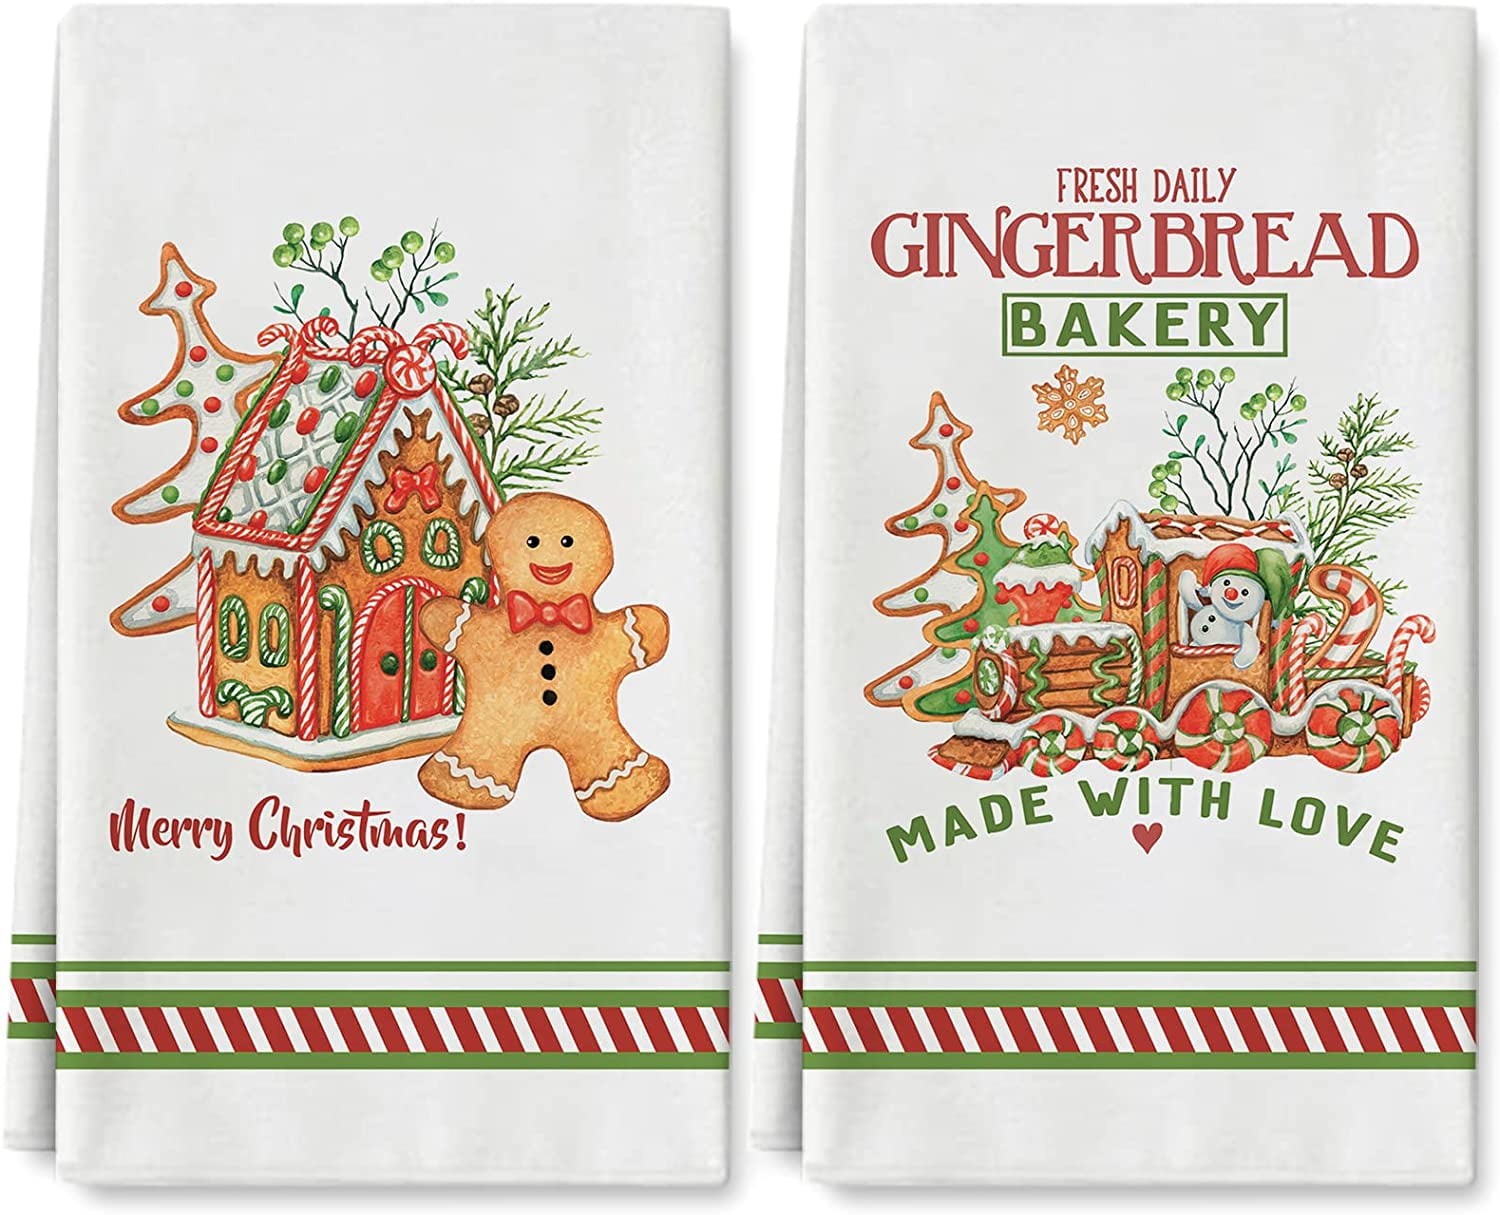 Jo-Ann Stores 3 Piece Christmas Kitchen Towel Set ~ Decorative Dish Towels,  100% Cotton Wash Towels for Drying, Cleaning, Cooking & Baking